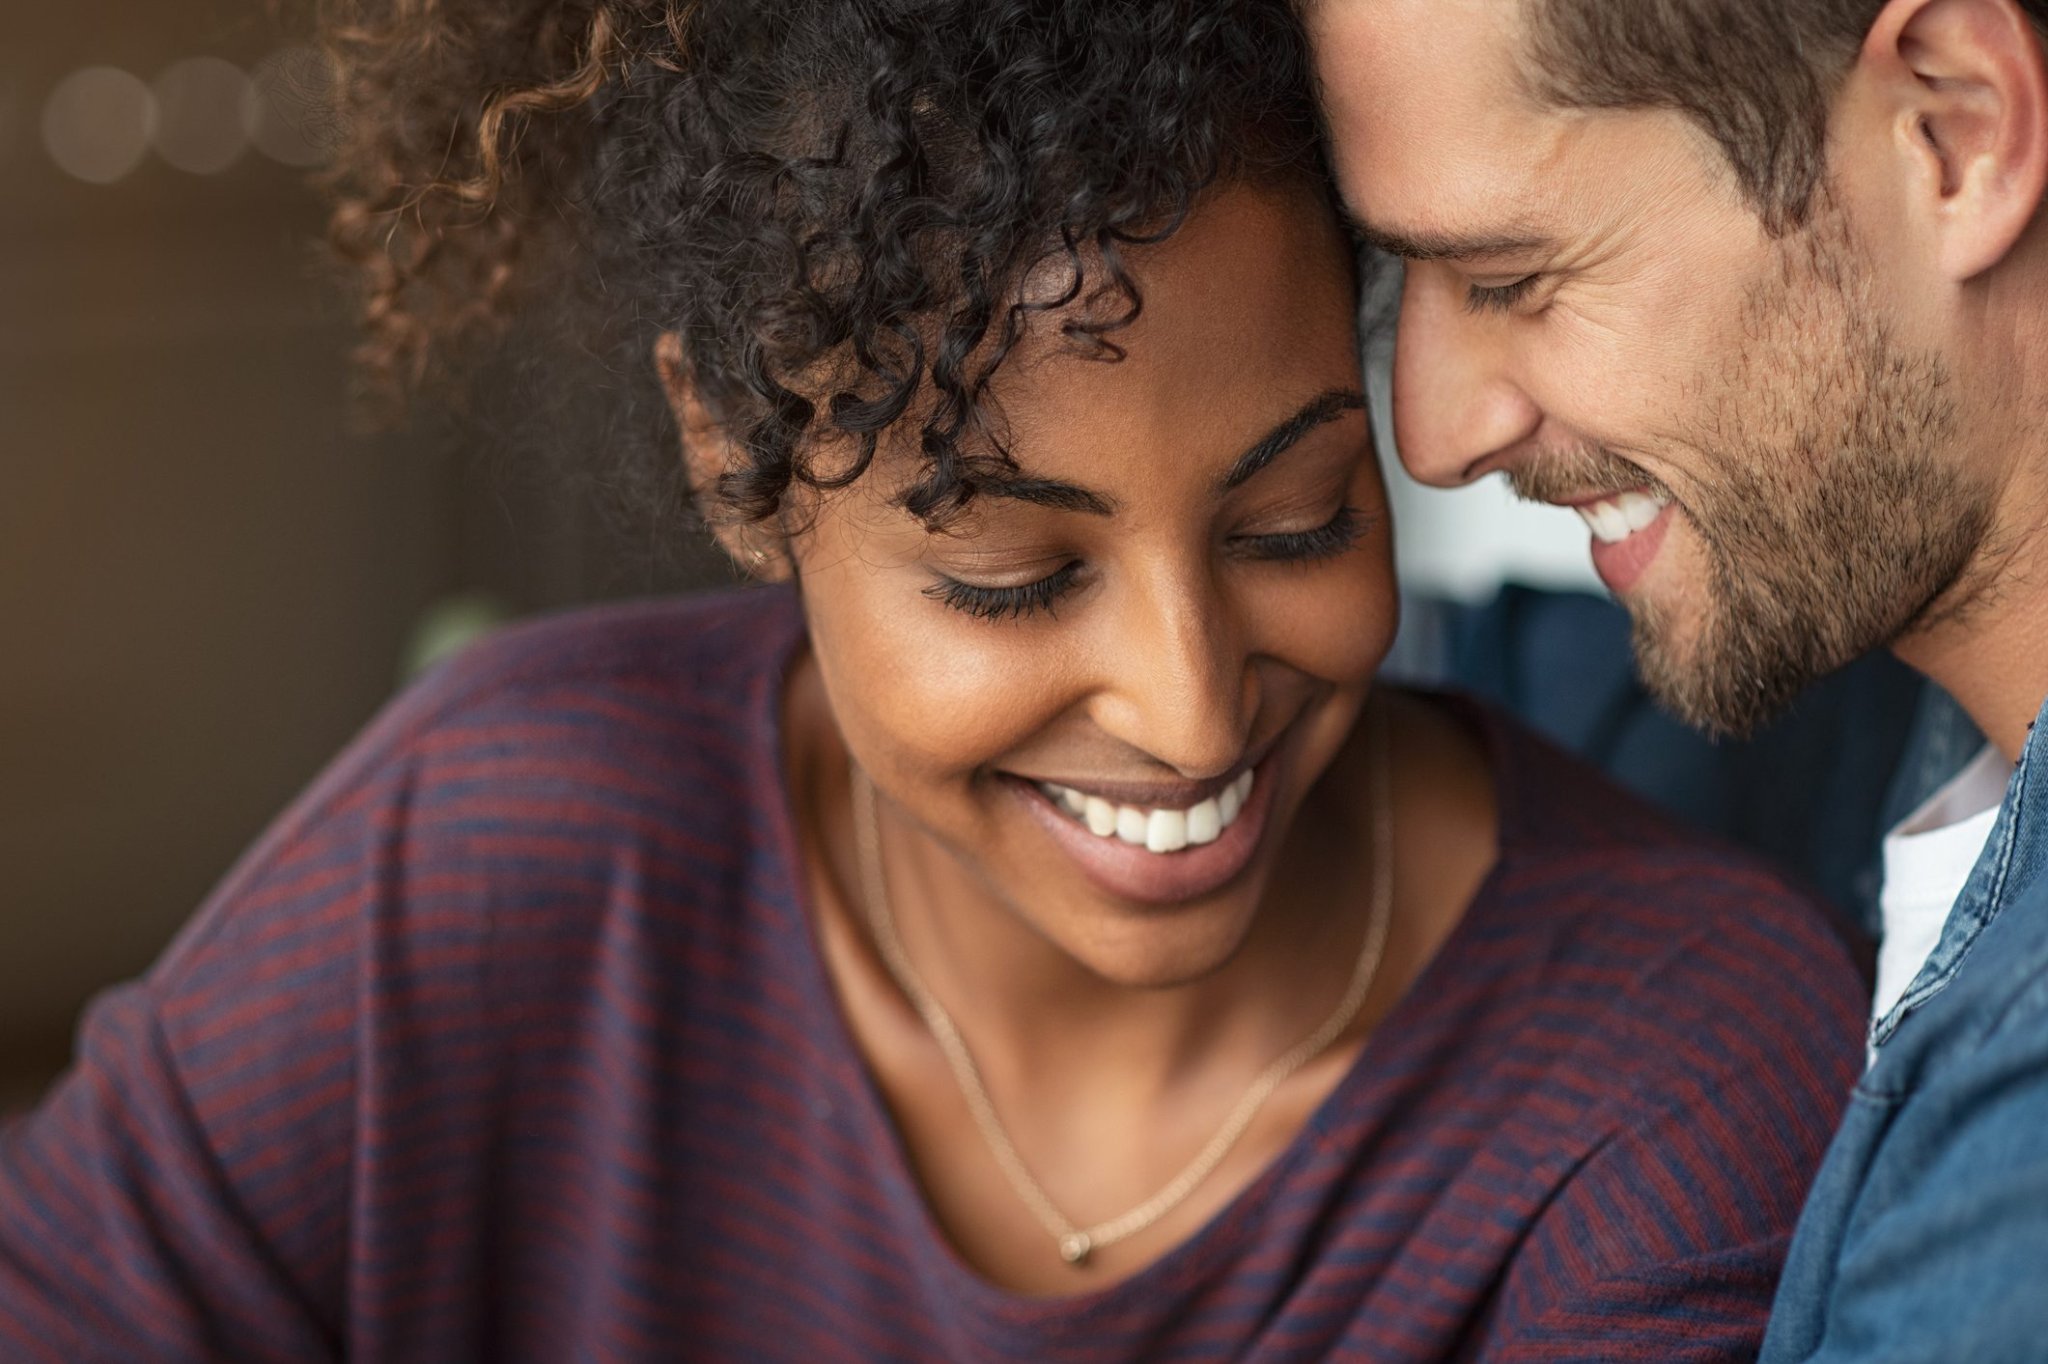 5 Factors Linked to Successful Relationships, According to Science